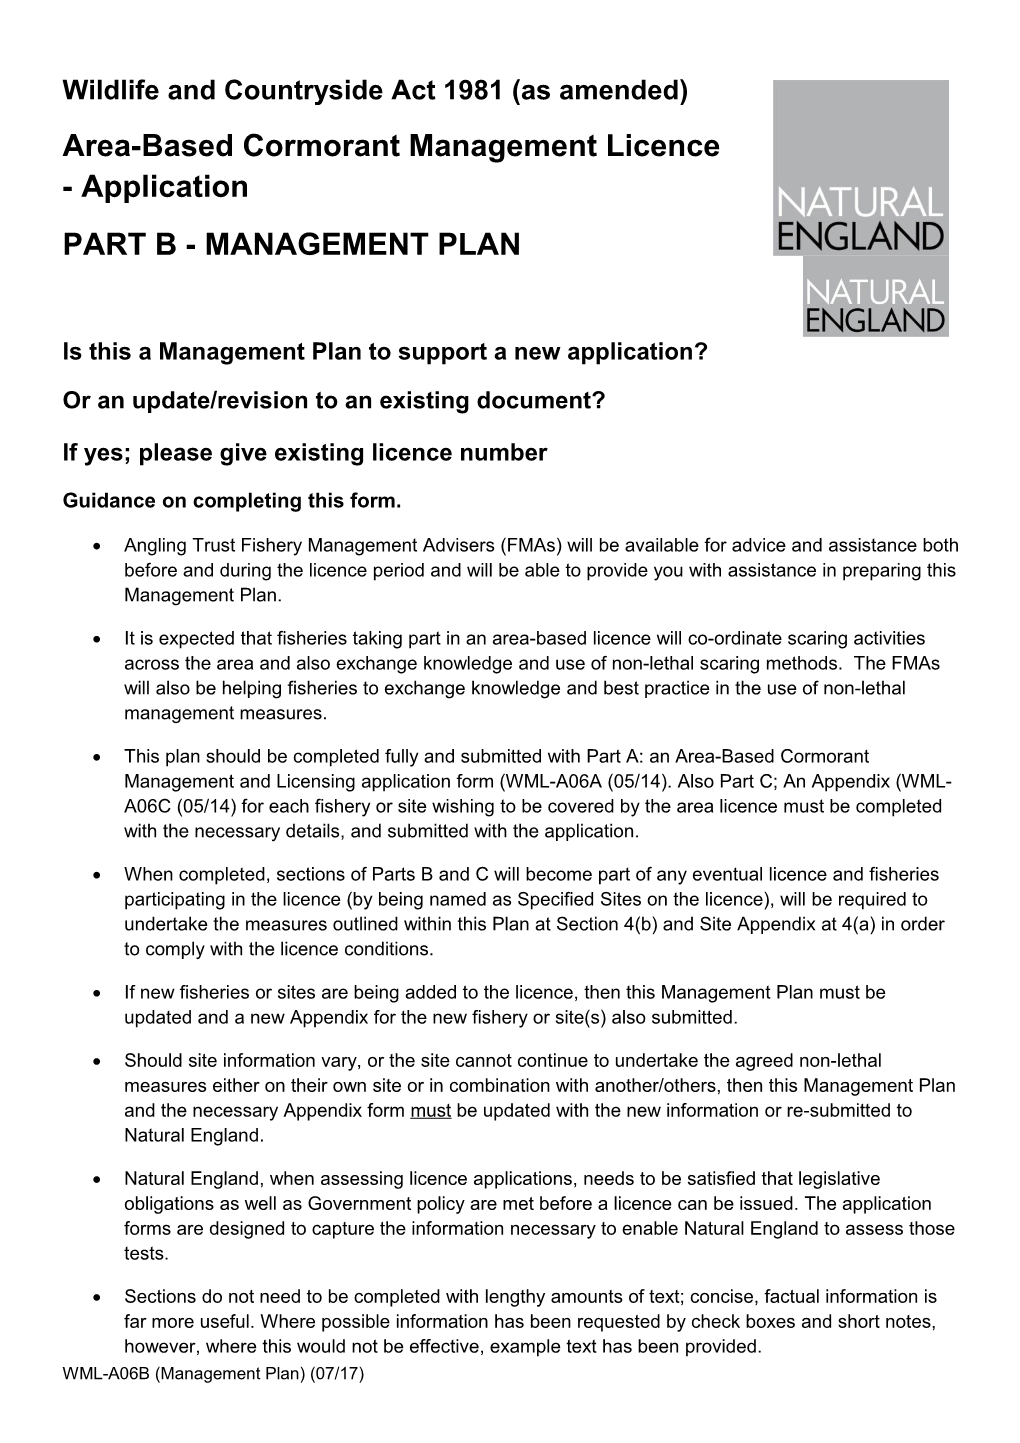 Is This a Management Plan to Support a New Application? Select Yes No